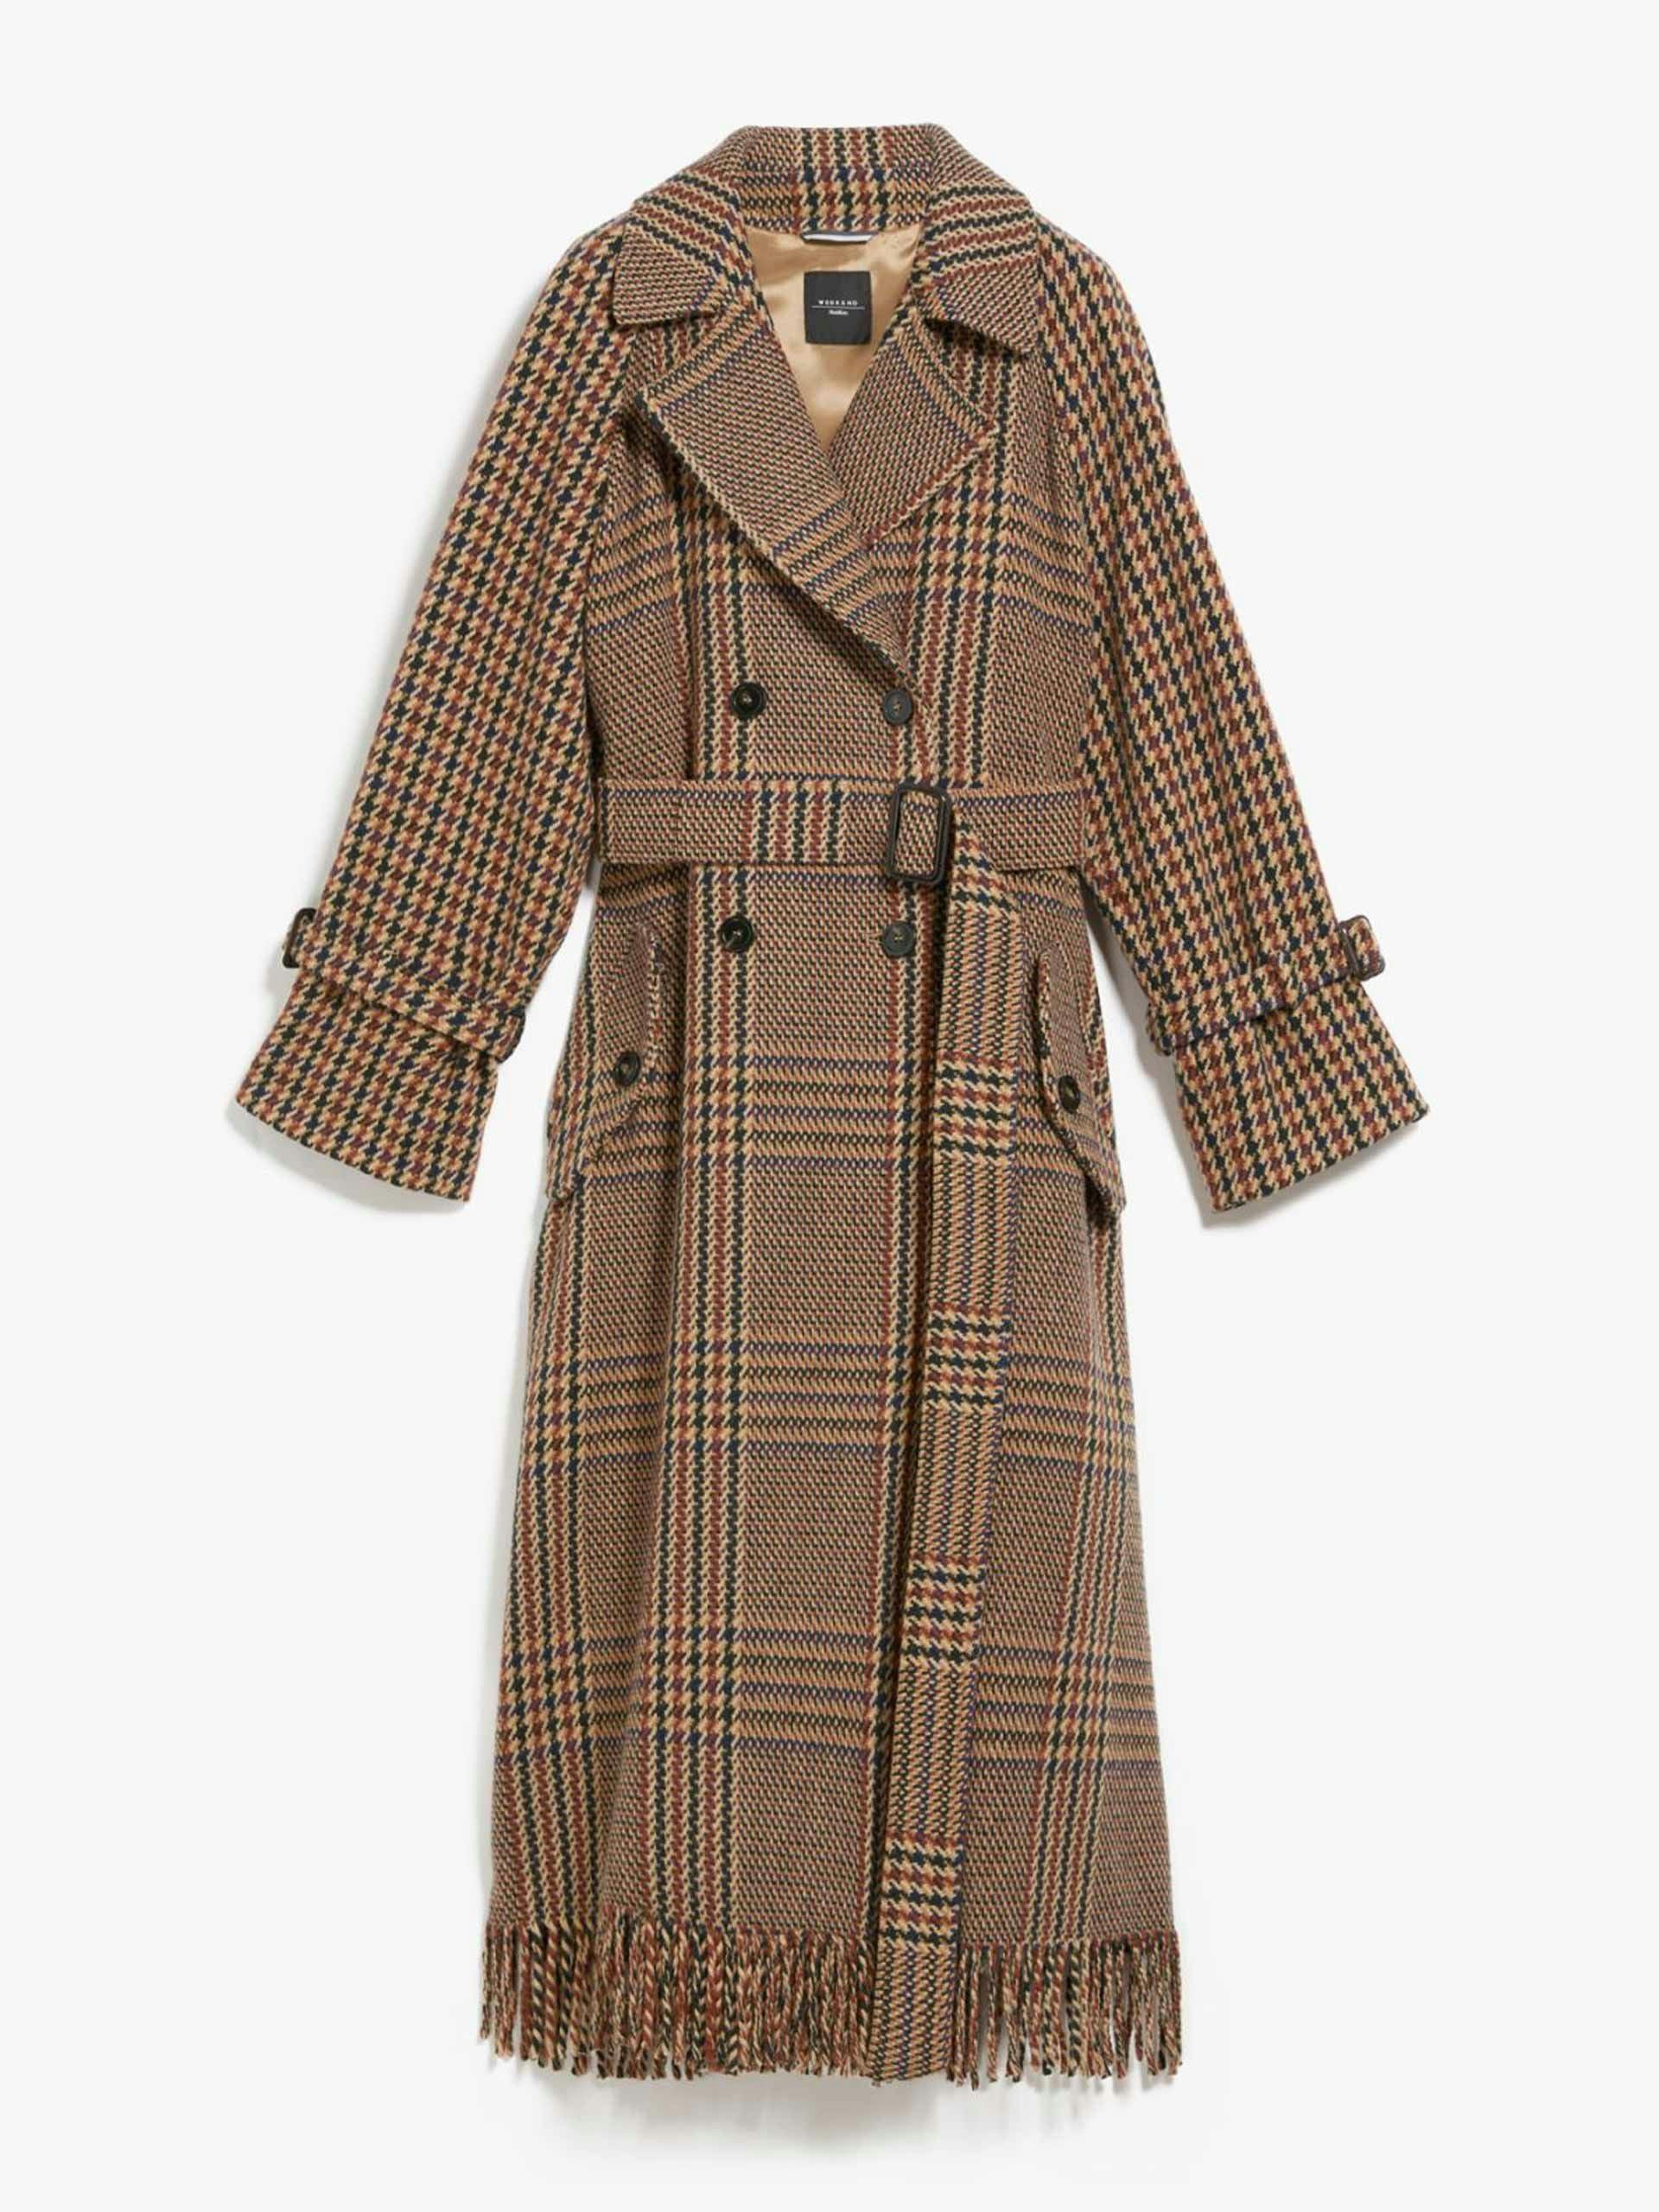 Patchwork-inspired wool coat